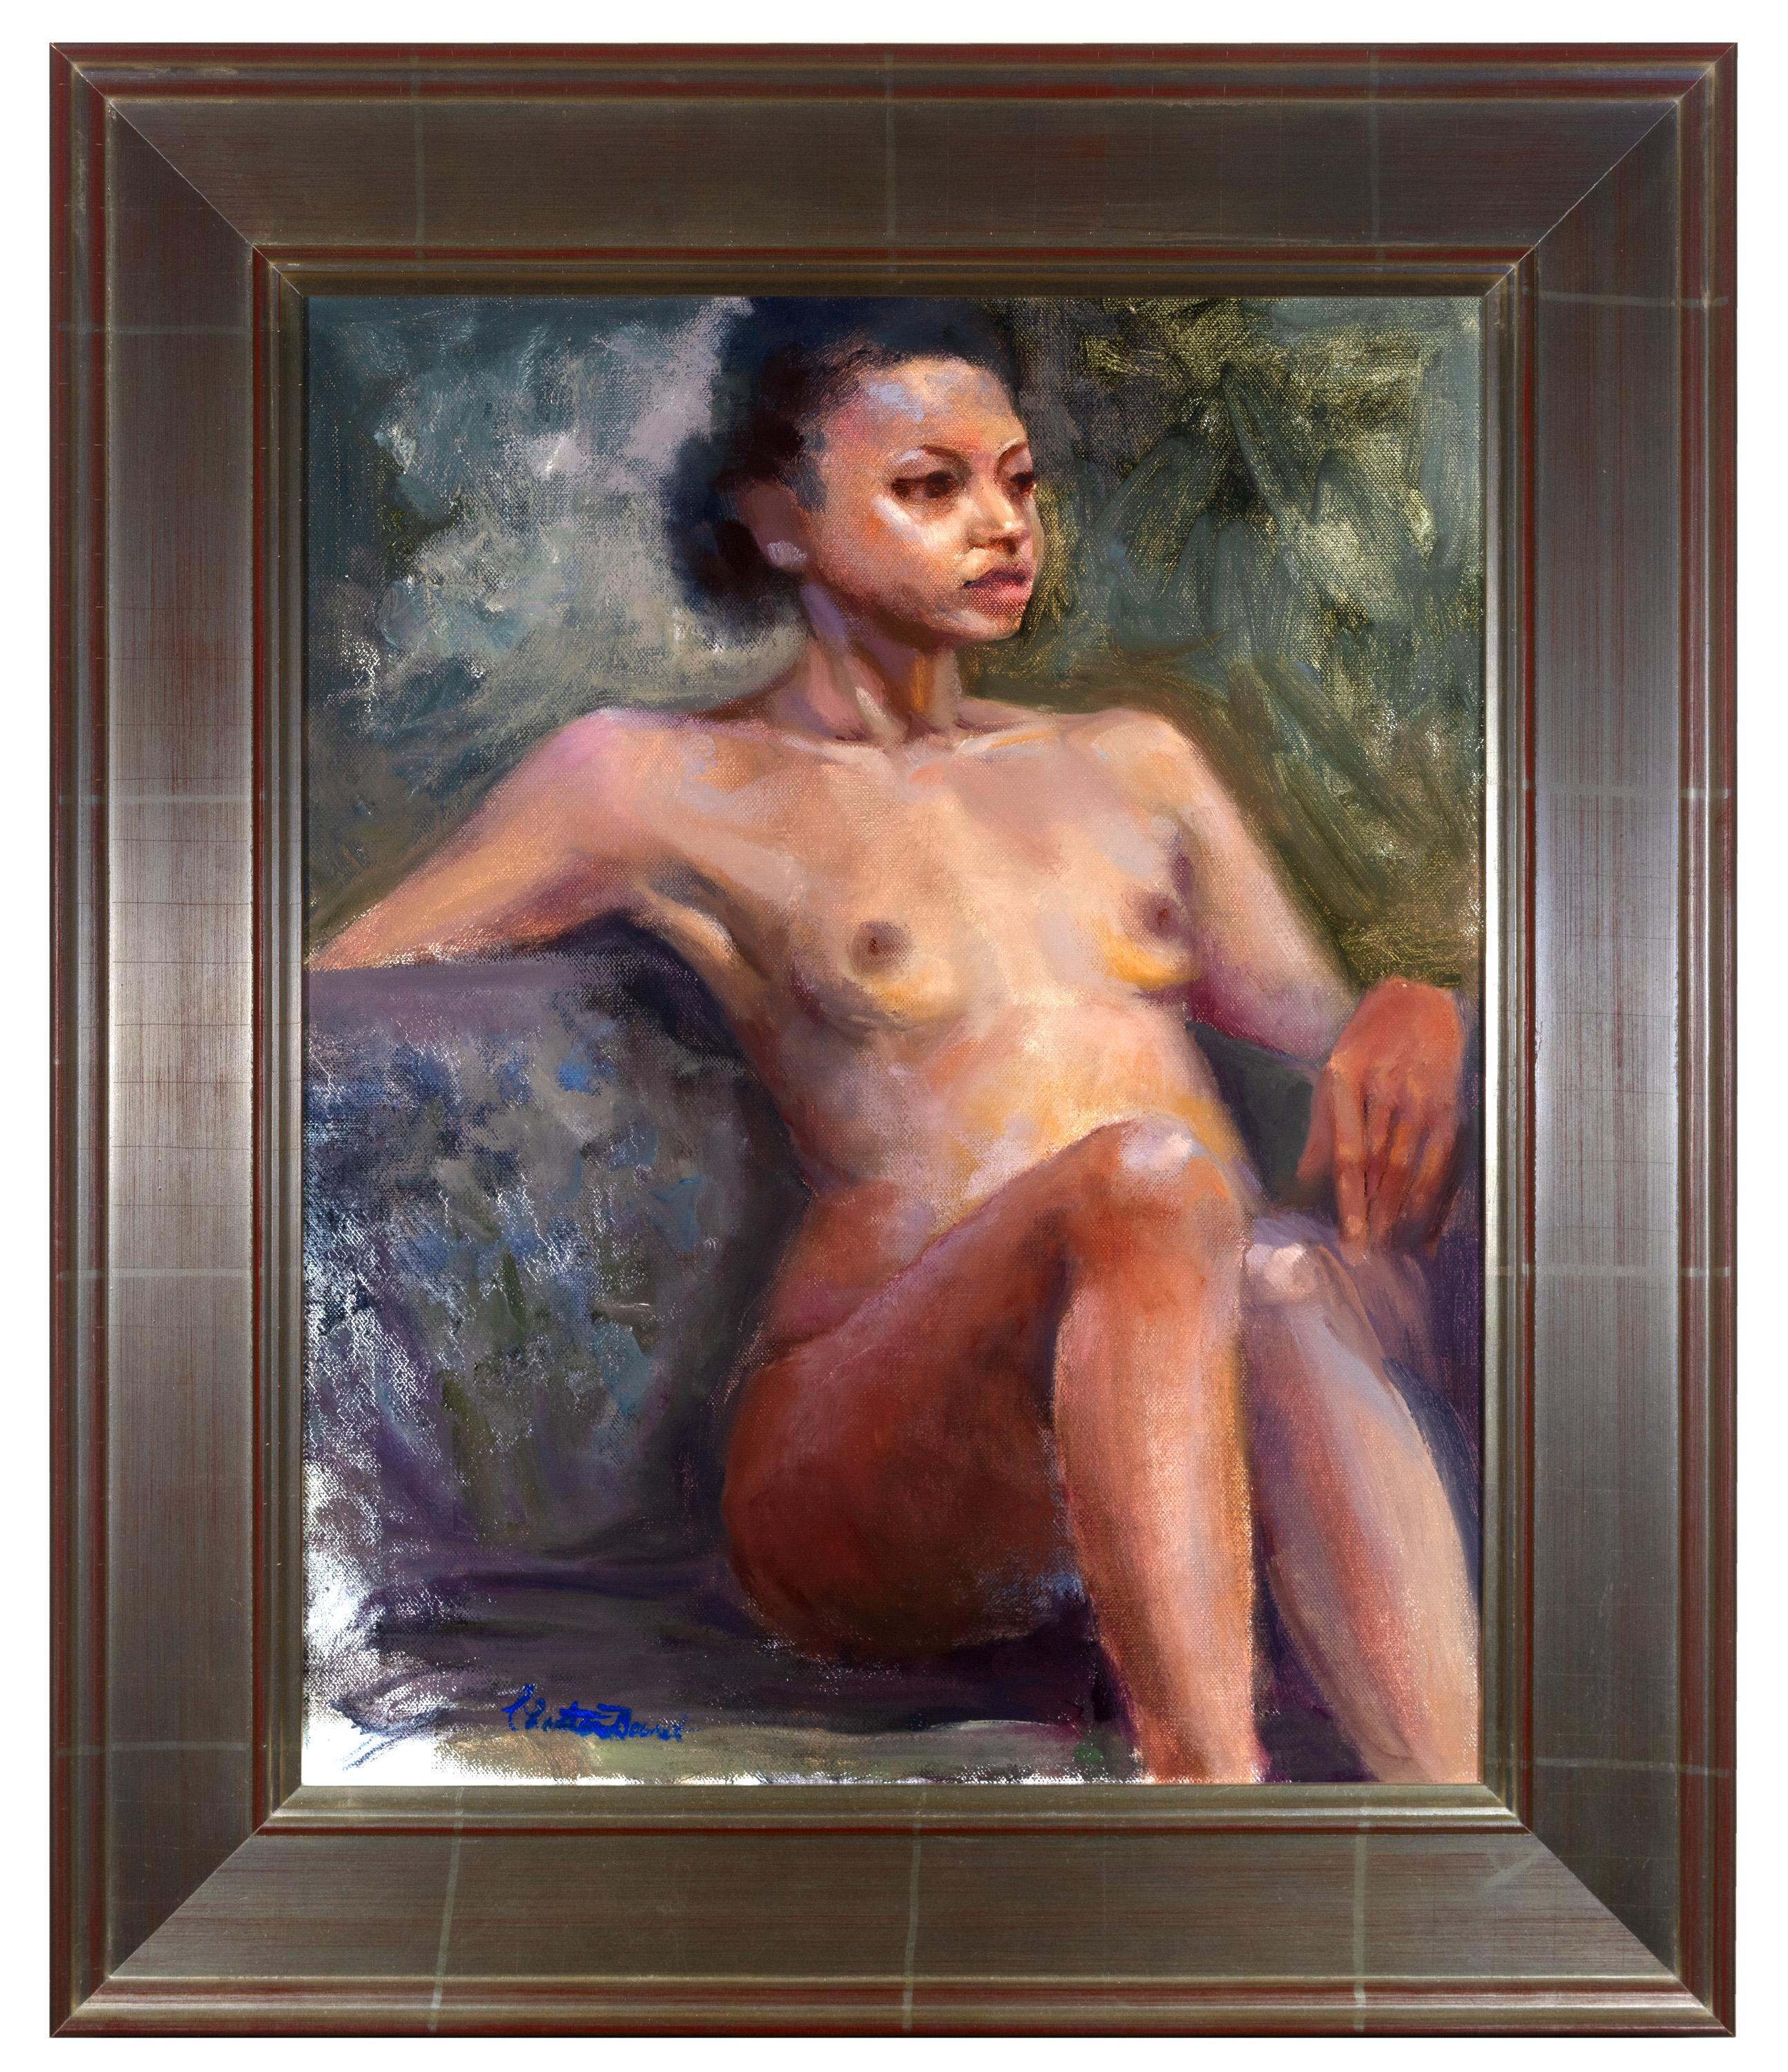 Christiane Bouret Figurative Painting - Nude Oil Female Figure Realism Expressionism Contemporary Signed